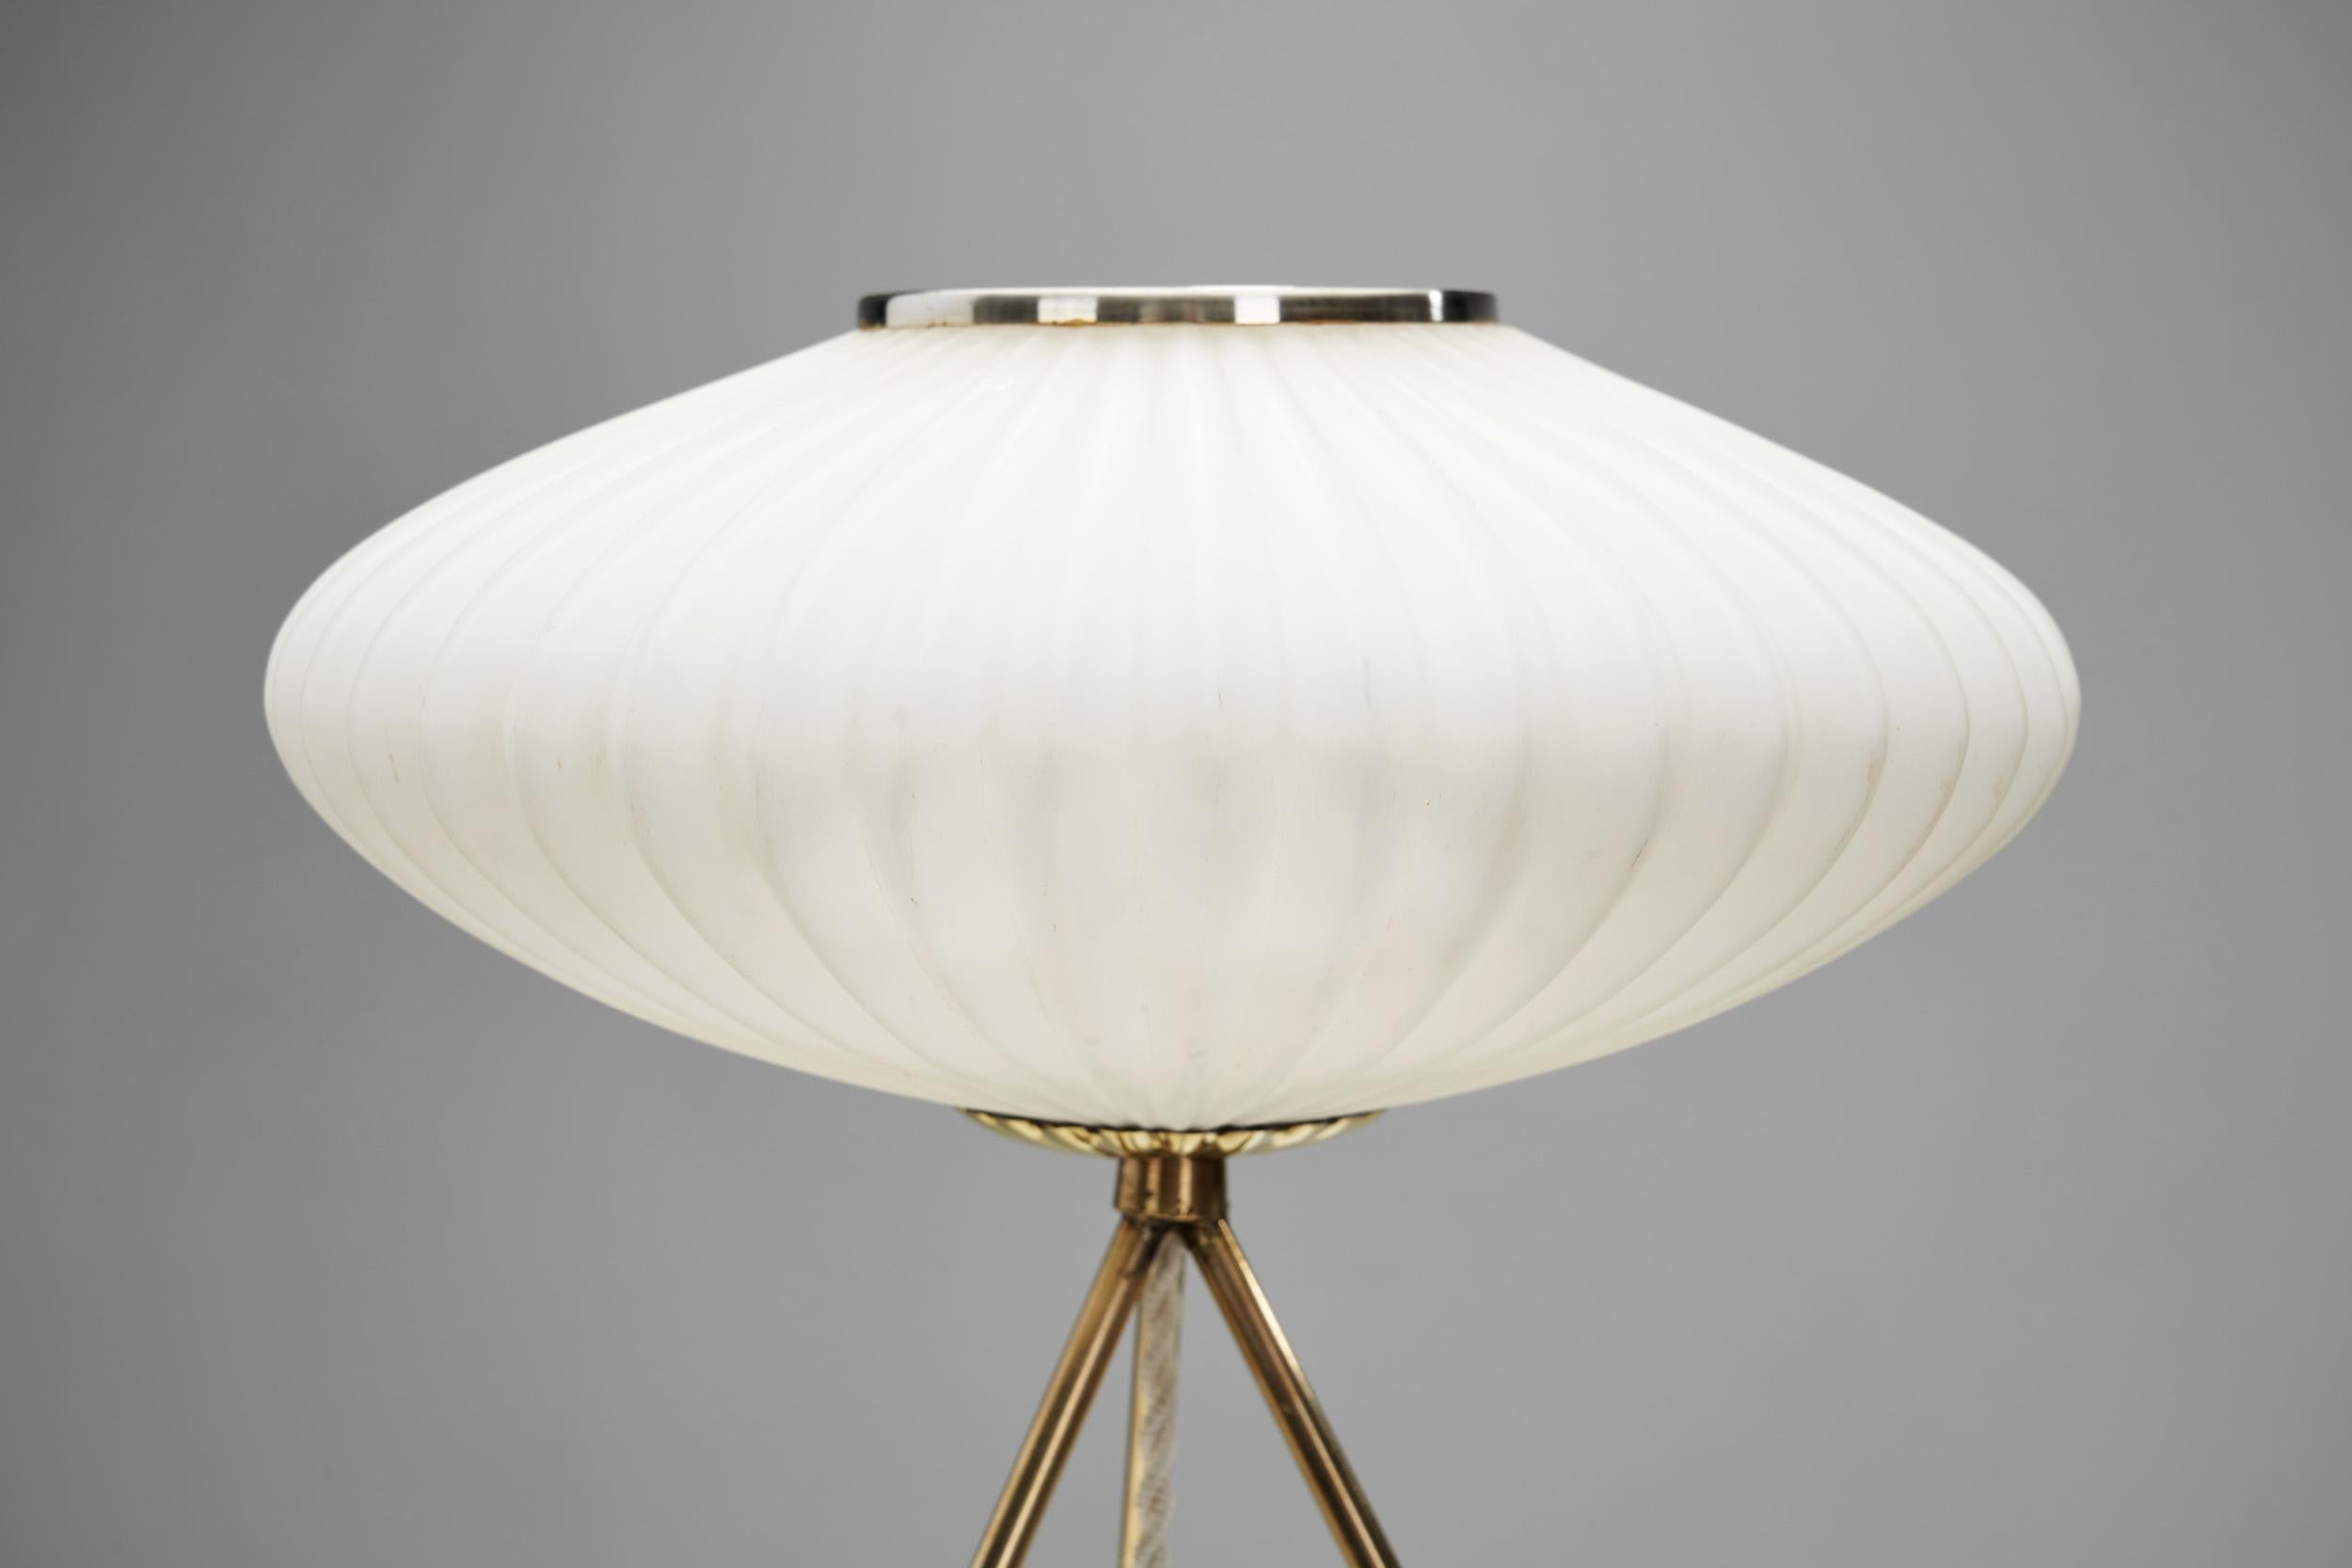 European Modern Tripod Table Lamp with Opal Glass Shade, Europe 1960s For Sale 2